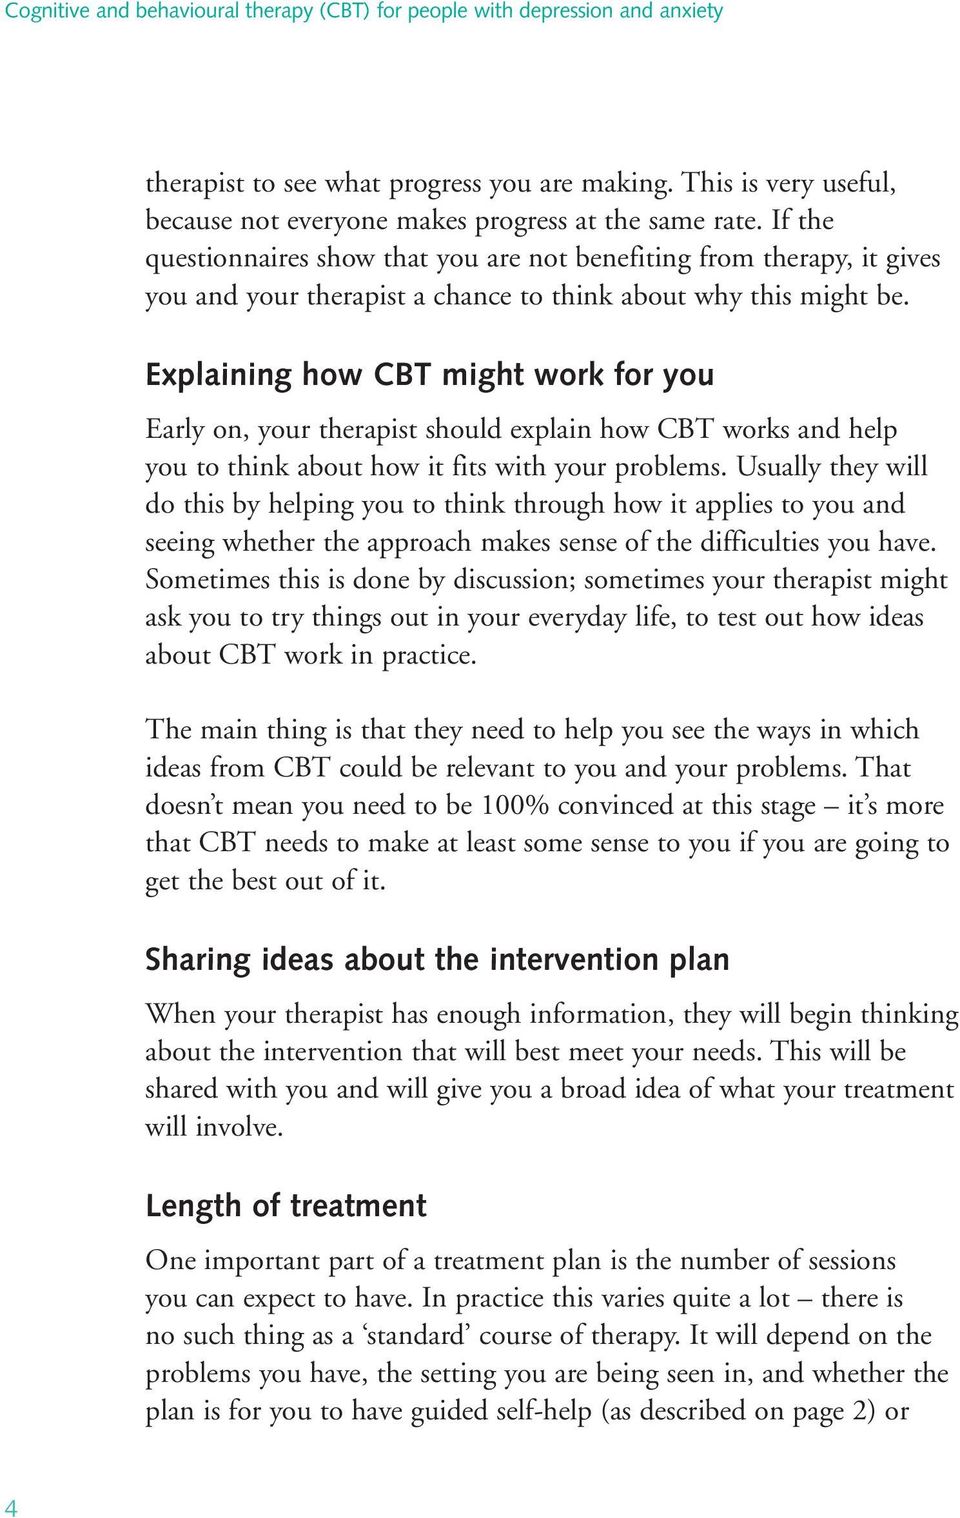 Explaining how CBT might work for you Early on, your therapist should explain how CBT works and help you to think about how it fits with your problems.